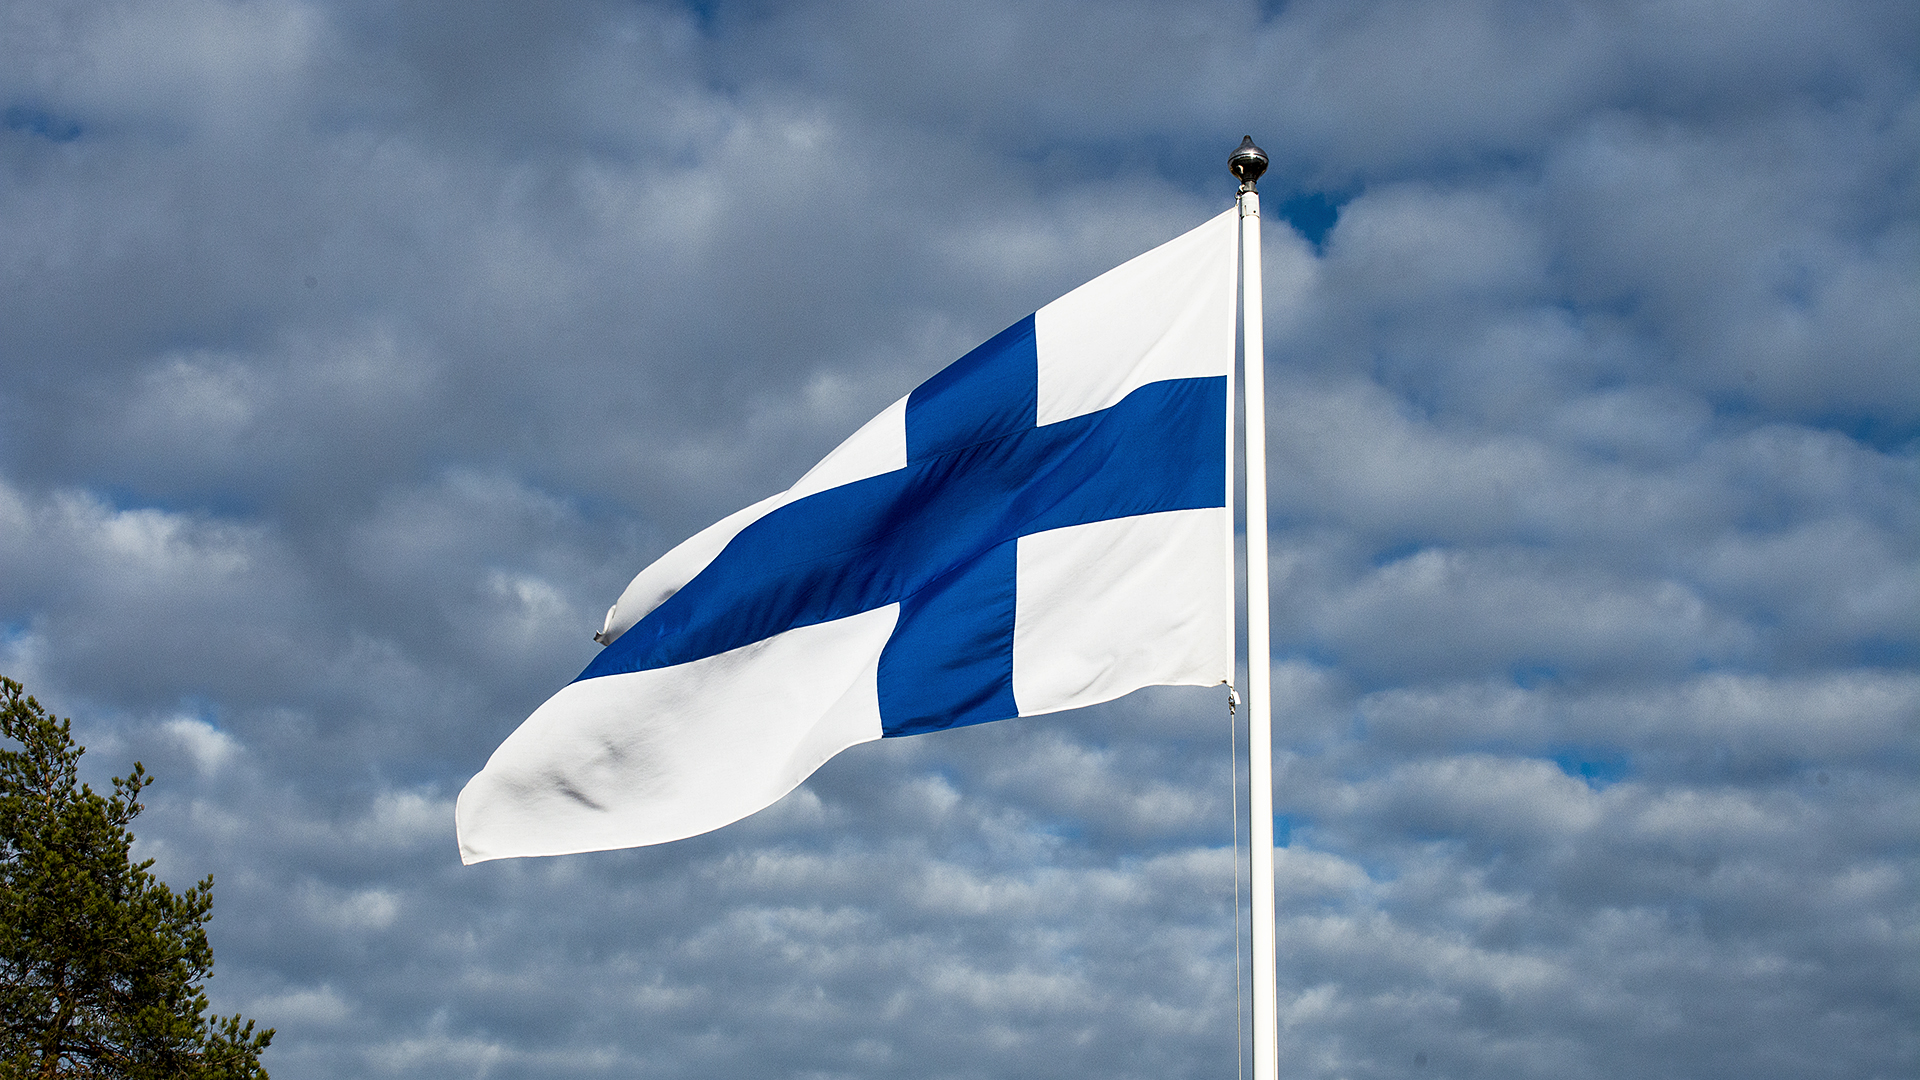 In Finland, the flags float in honor of the United Nations Day